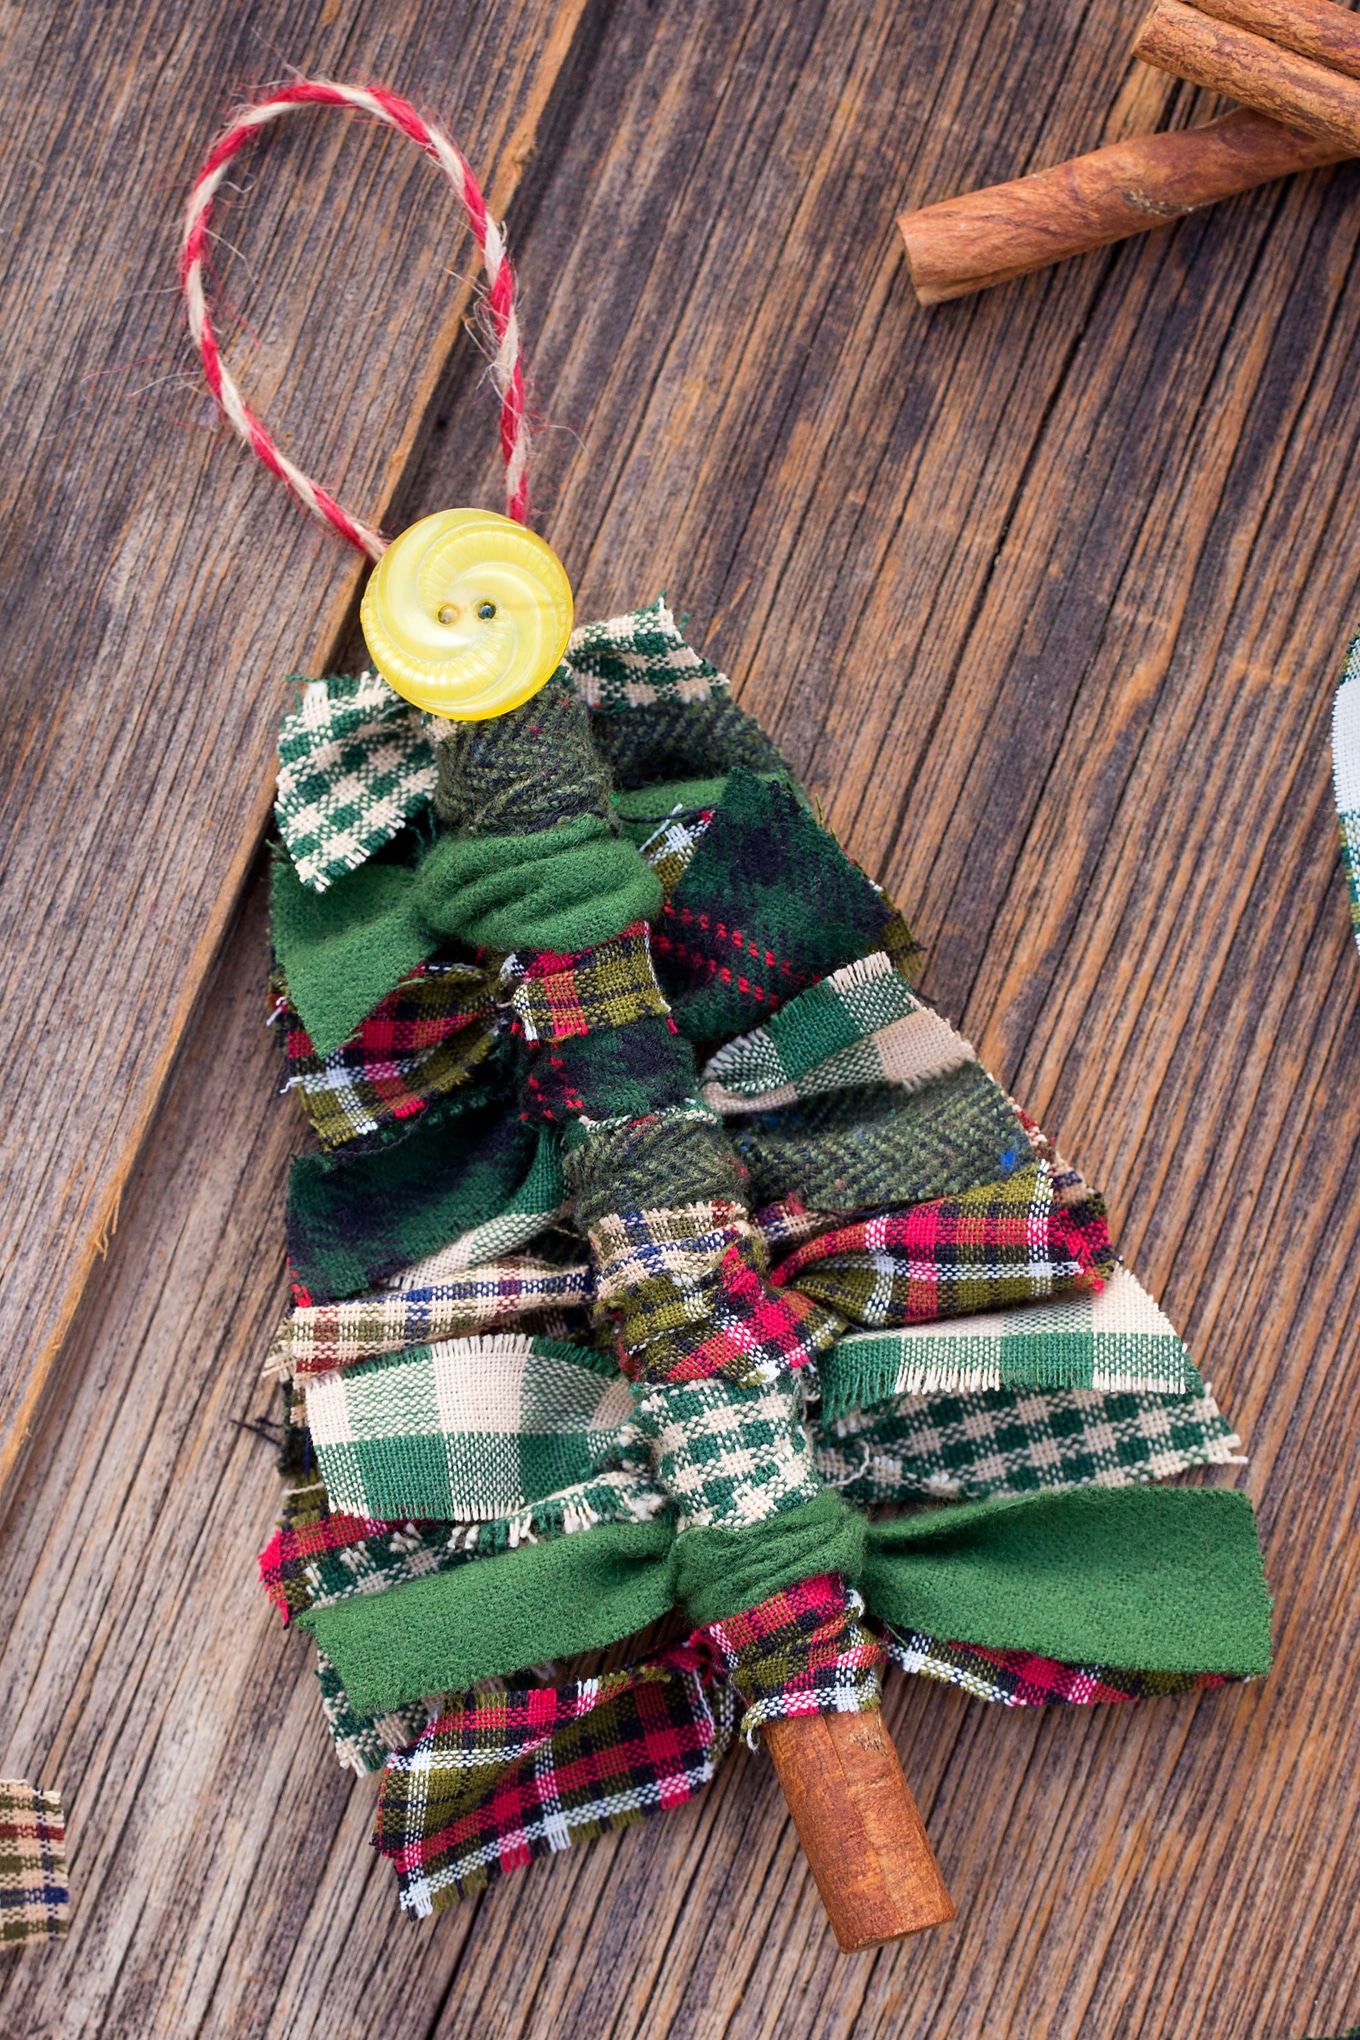 Learn how to Make Fabric Tree Ornaments for Christmas